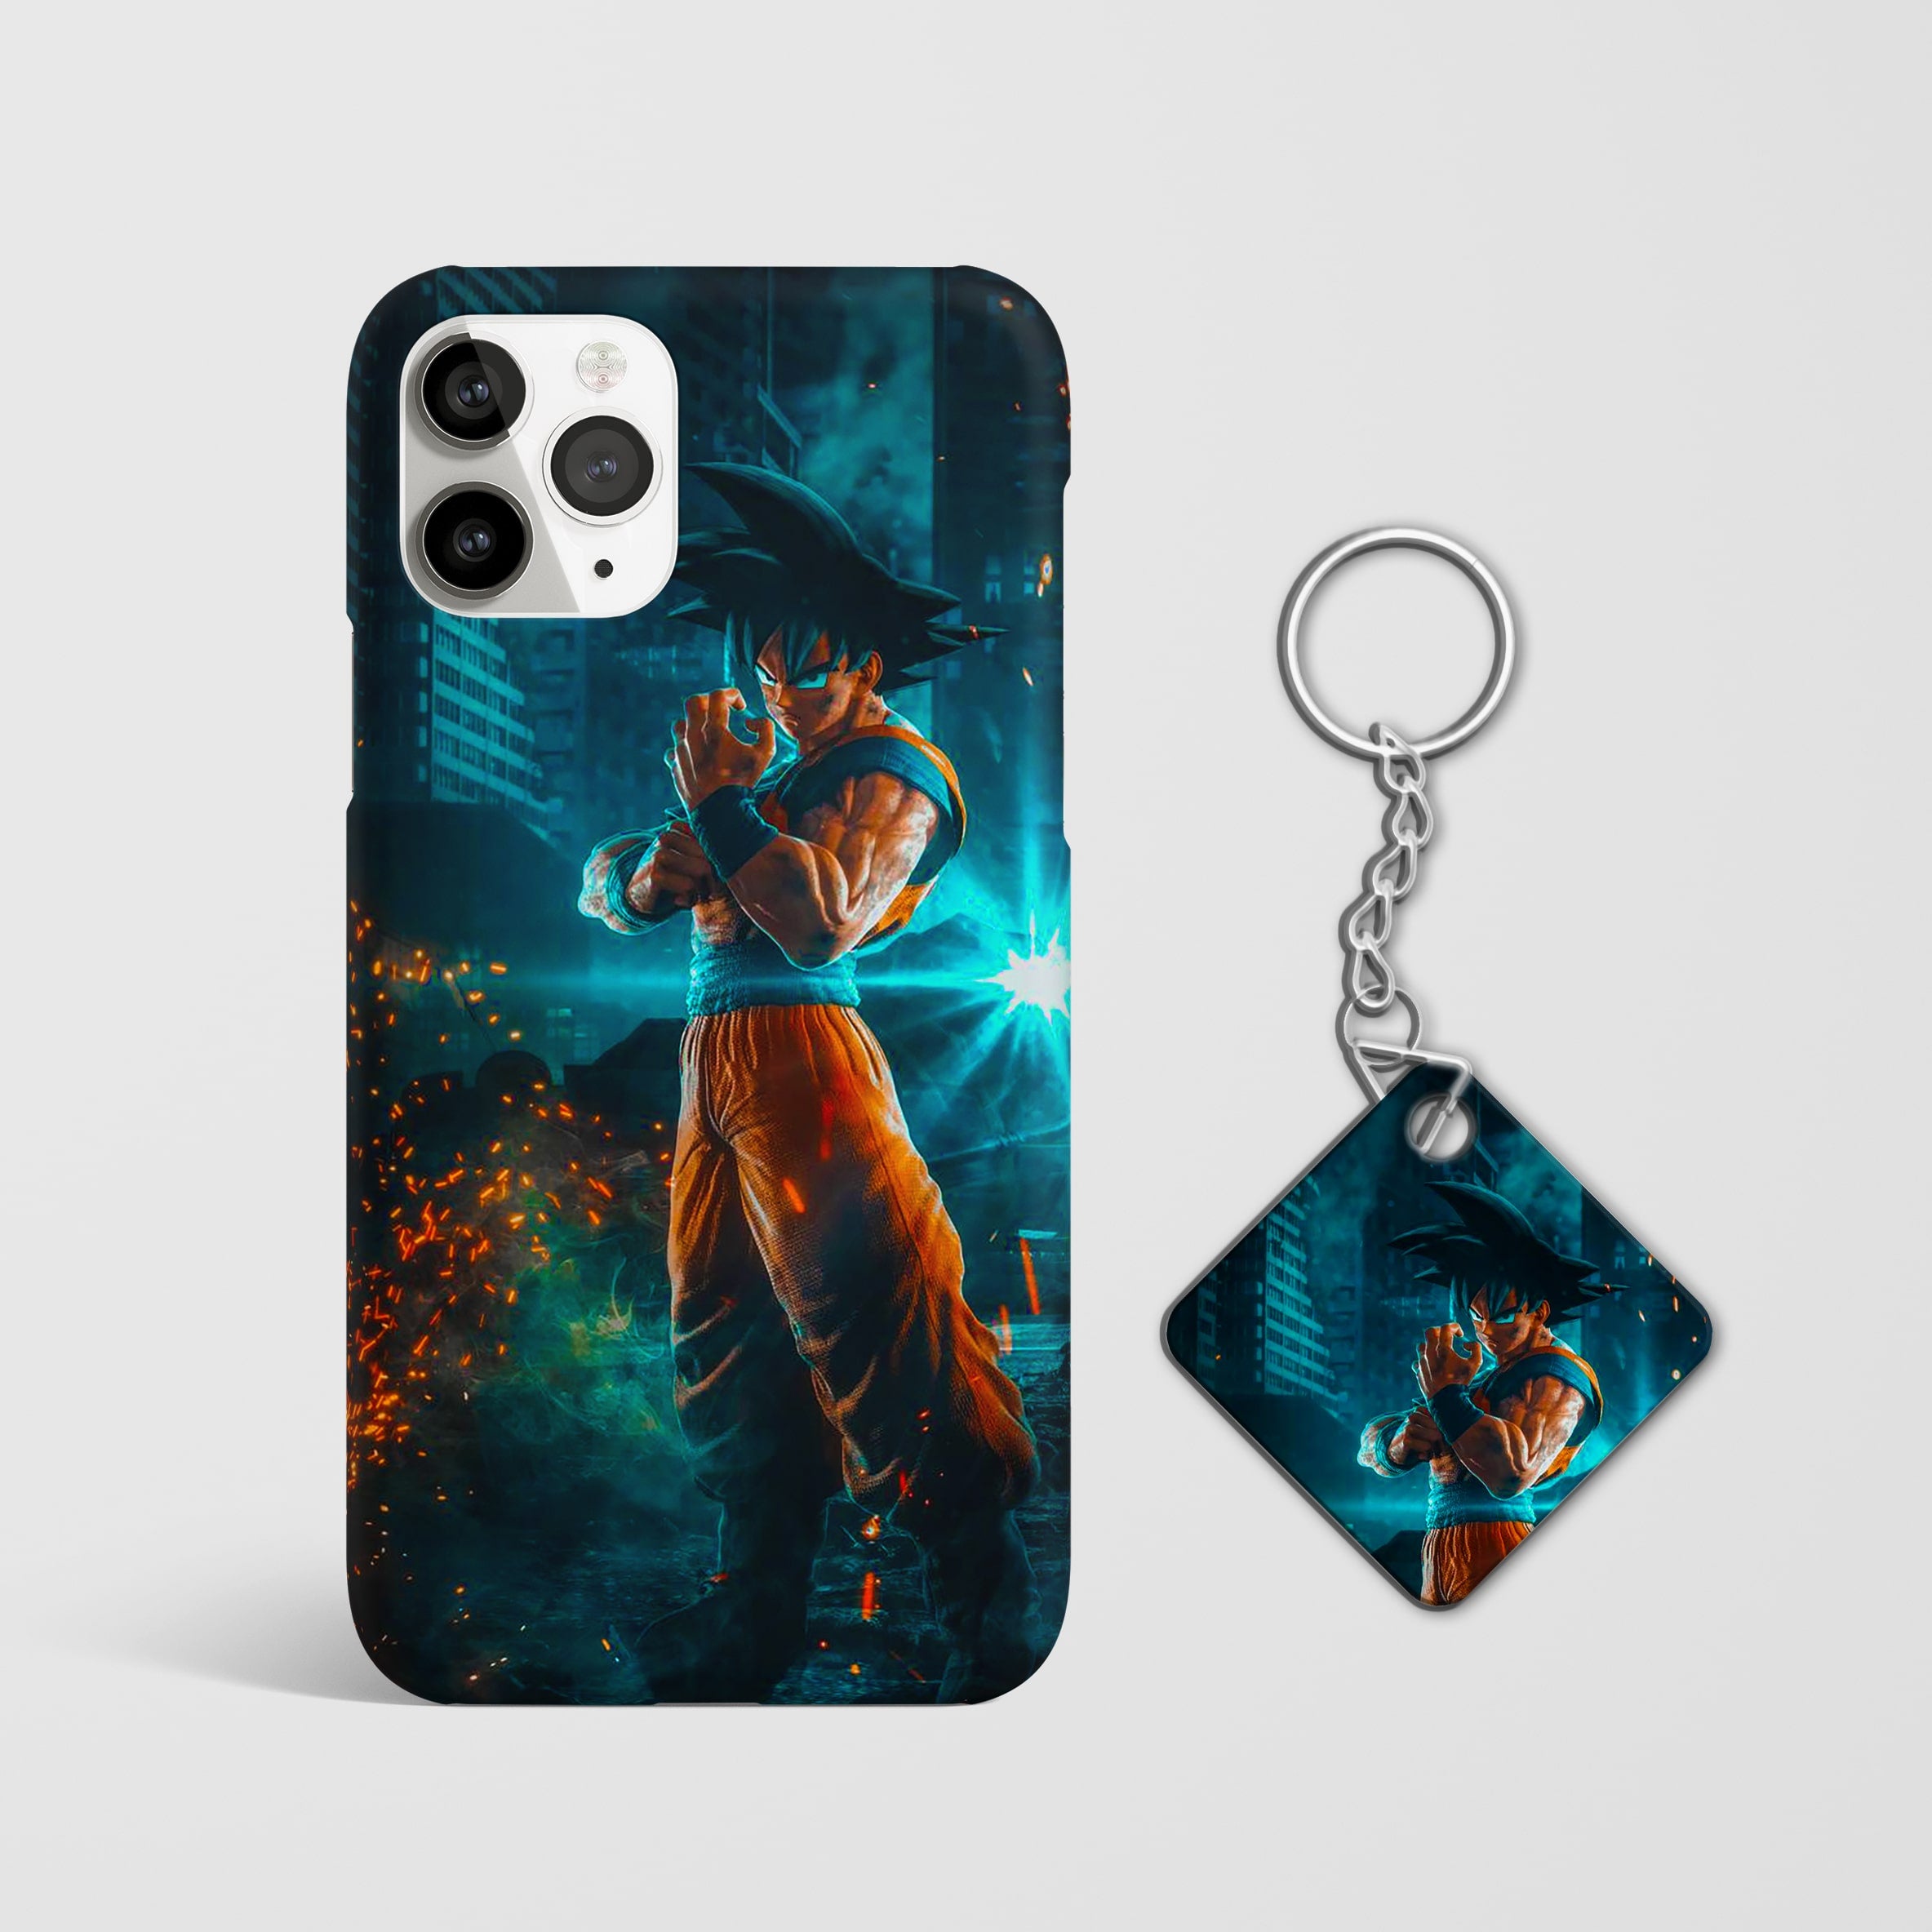 Close-up of Goku's intense training session on phone case with Keychain.